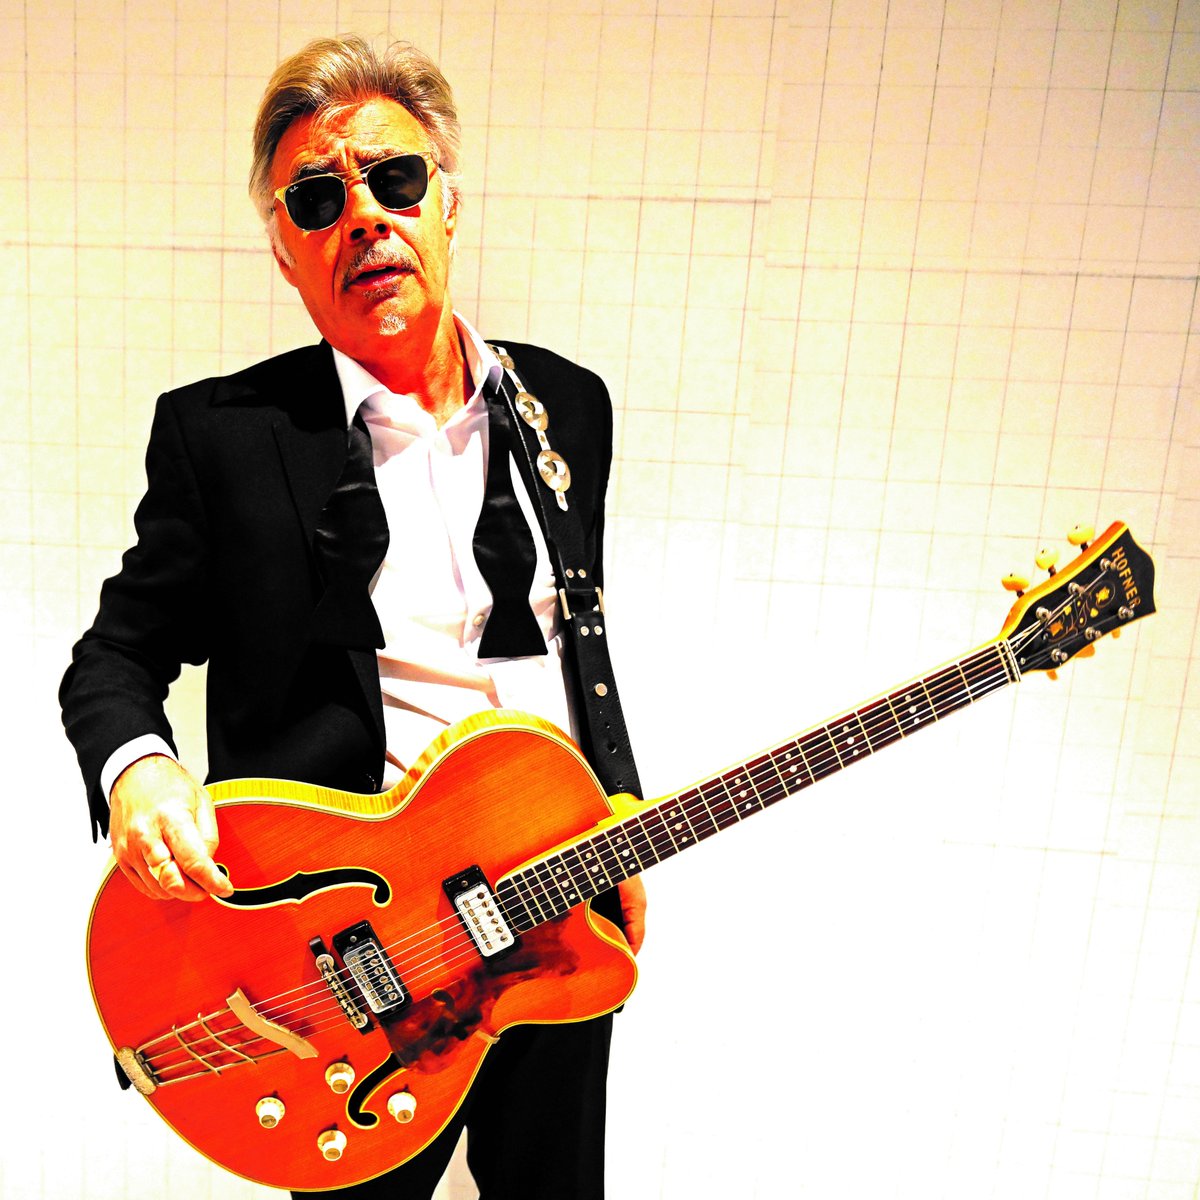 Times for tonight's sold out book event with @GlenMatlock 6.30pm - Bar open 7.30pm - Glen on stage 8.45pm - Book signing There are no tickets available on the door, sorry!